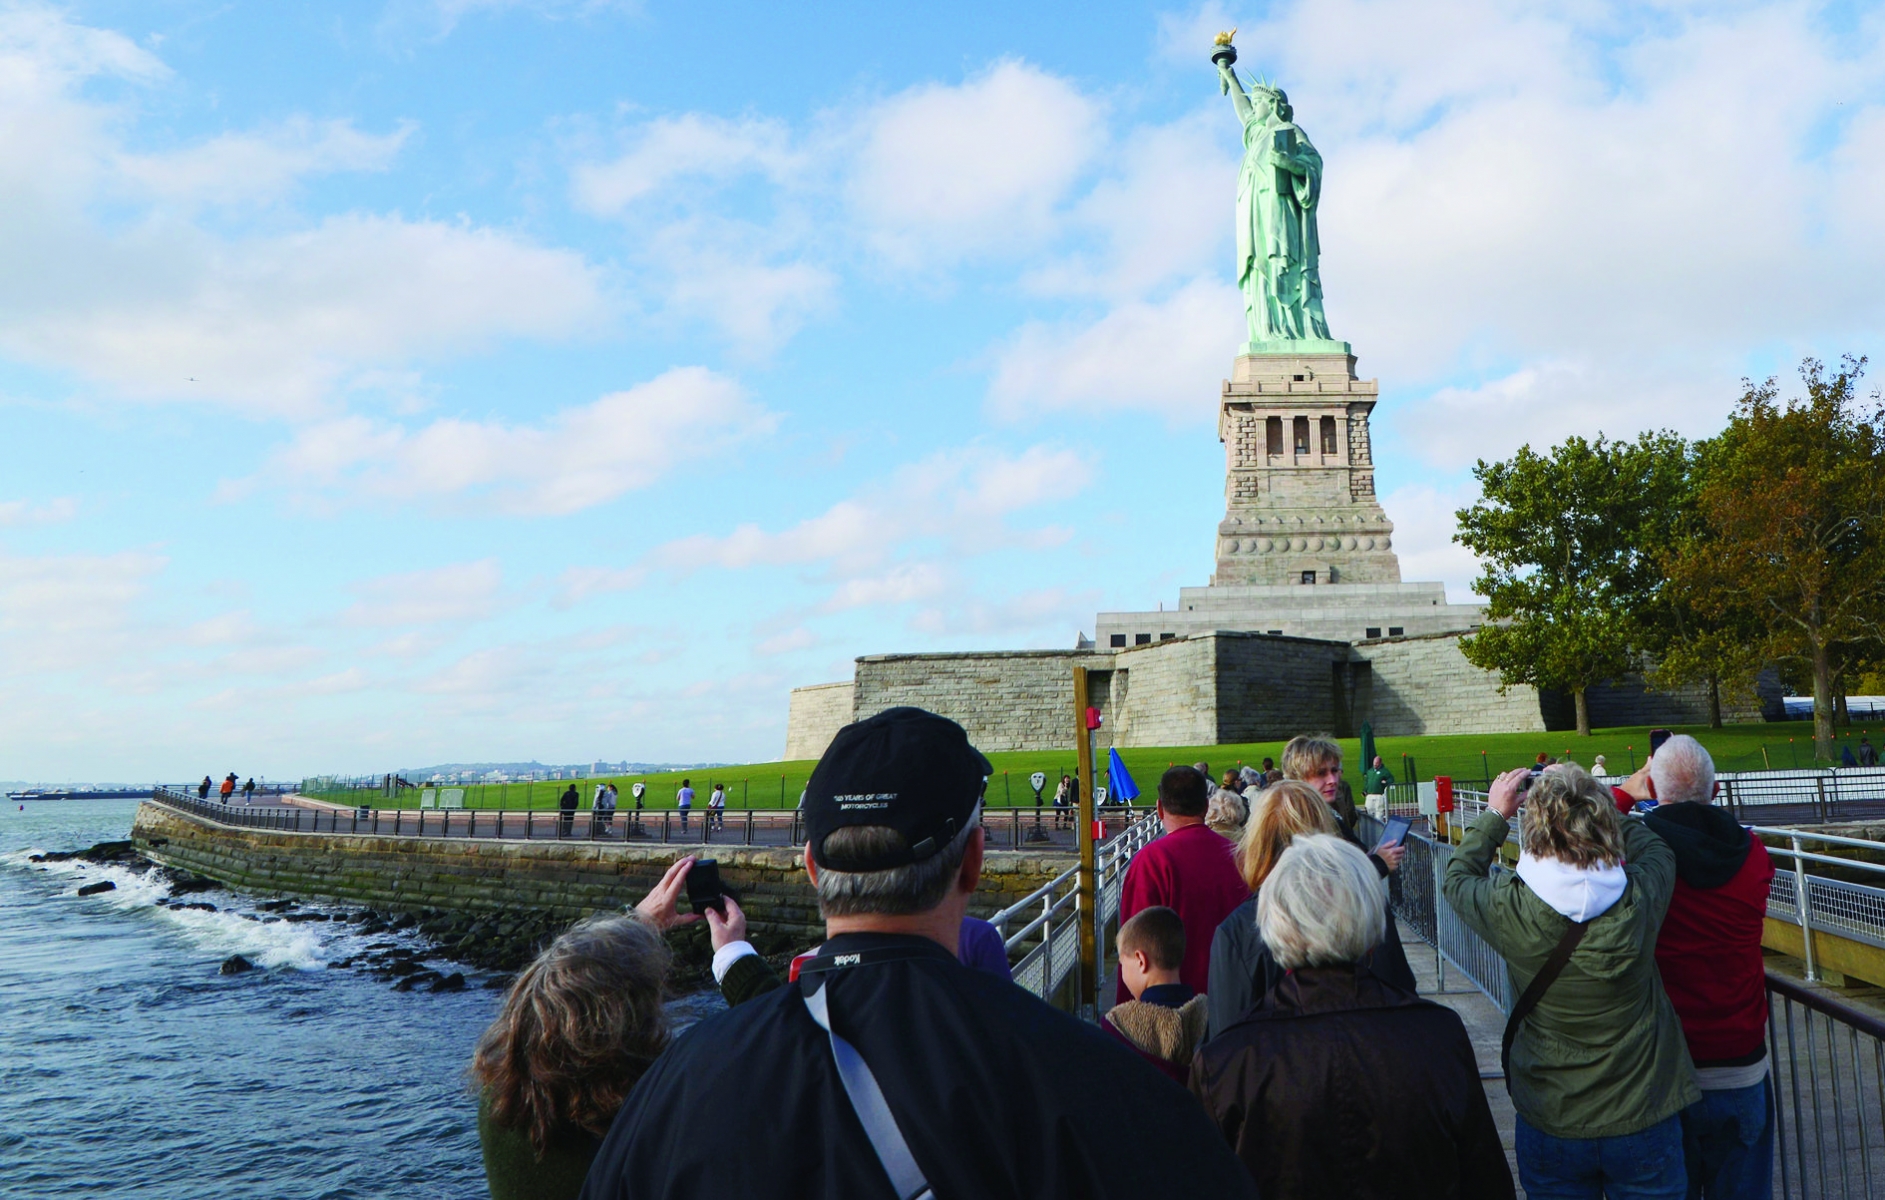 epa03908657 Tourists take pictures of the reopened Statue of Liberty, on Liberty Island in New York City, New York, USA, 13 October 2013. Four US states will pay the federal government to keep their major tourism attractions open for visitors. Arizona, South Dakota, Utah and New York state have agreed to pay the National Park Service to reopen locations that have been closed since the partial US government shutdown commenced on 01 October.  EPA/PETER FOLEY USA STATUE OF LIBERTY REOPENS